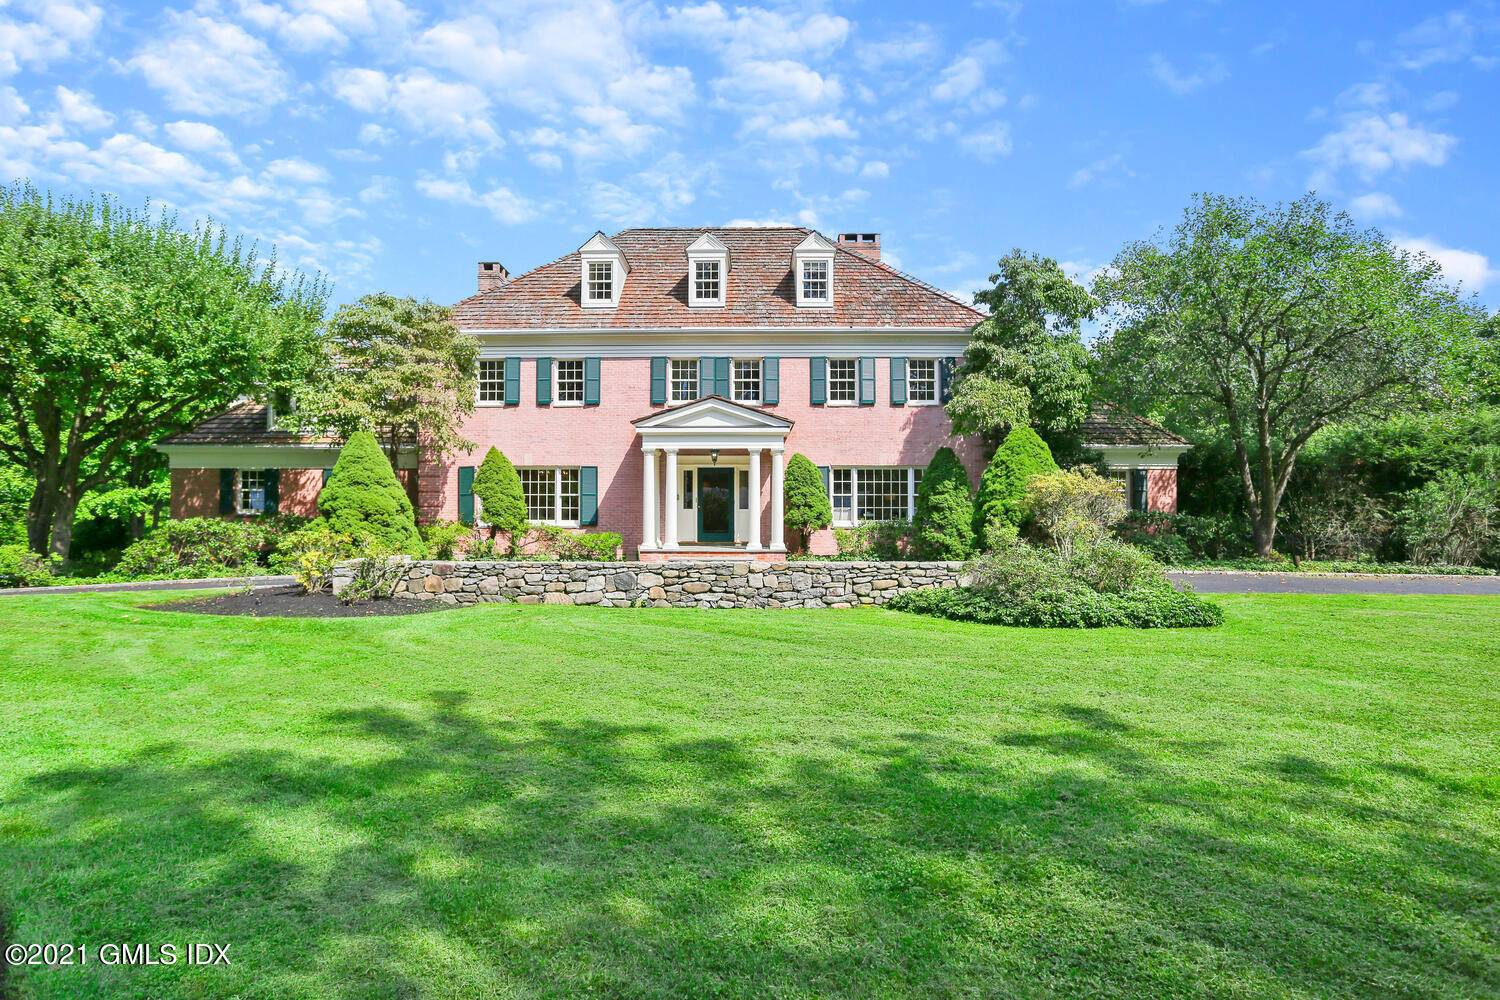 Impressive 8, 238 square foot brick clad Colonial, designed with relaxed living and entertaining in mind, graces four private, scenic acres.